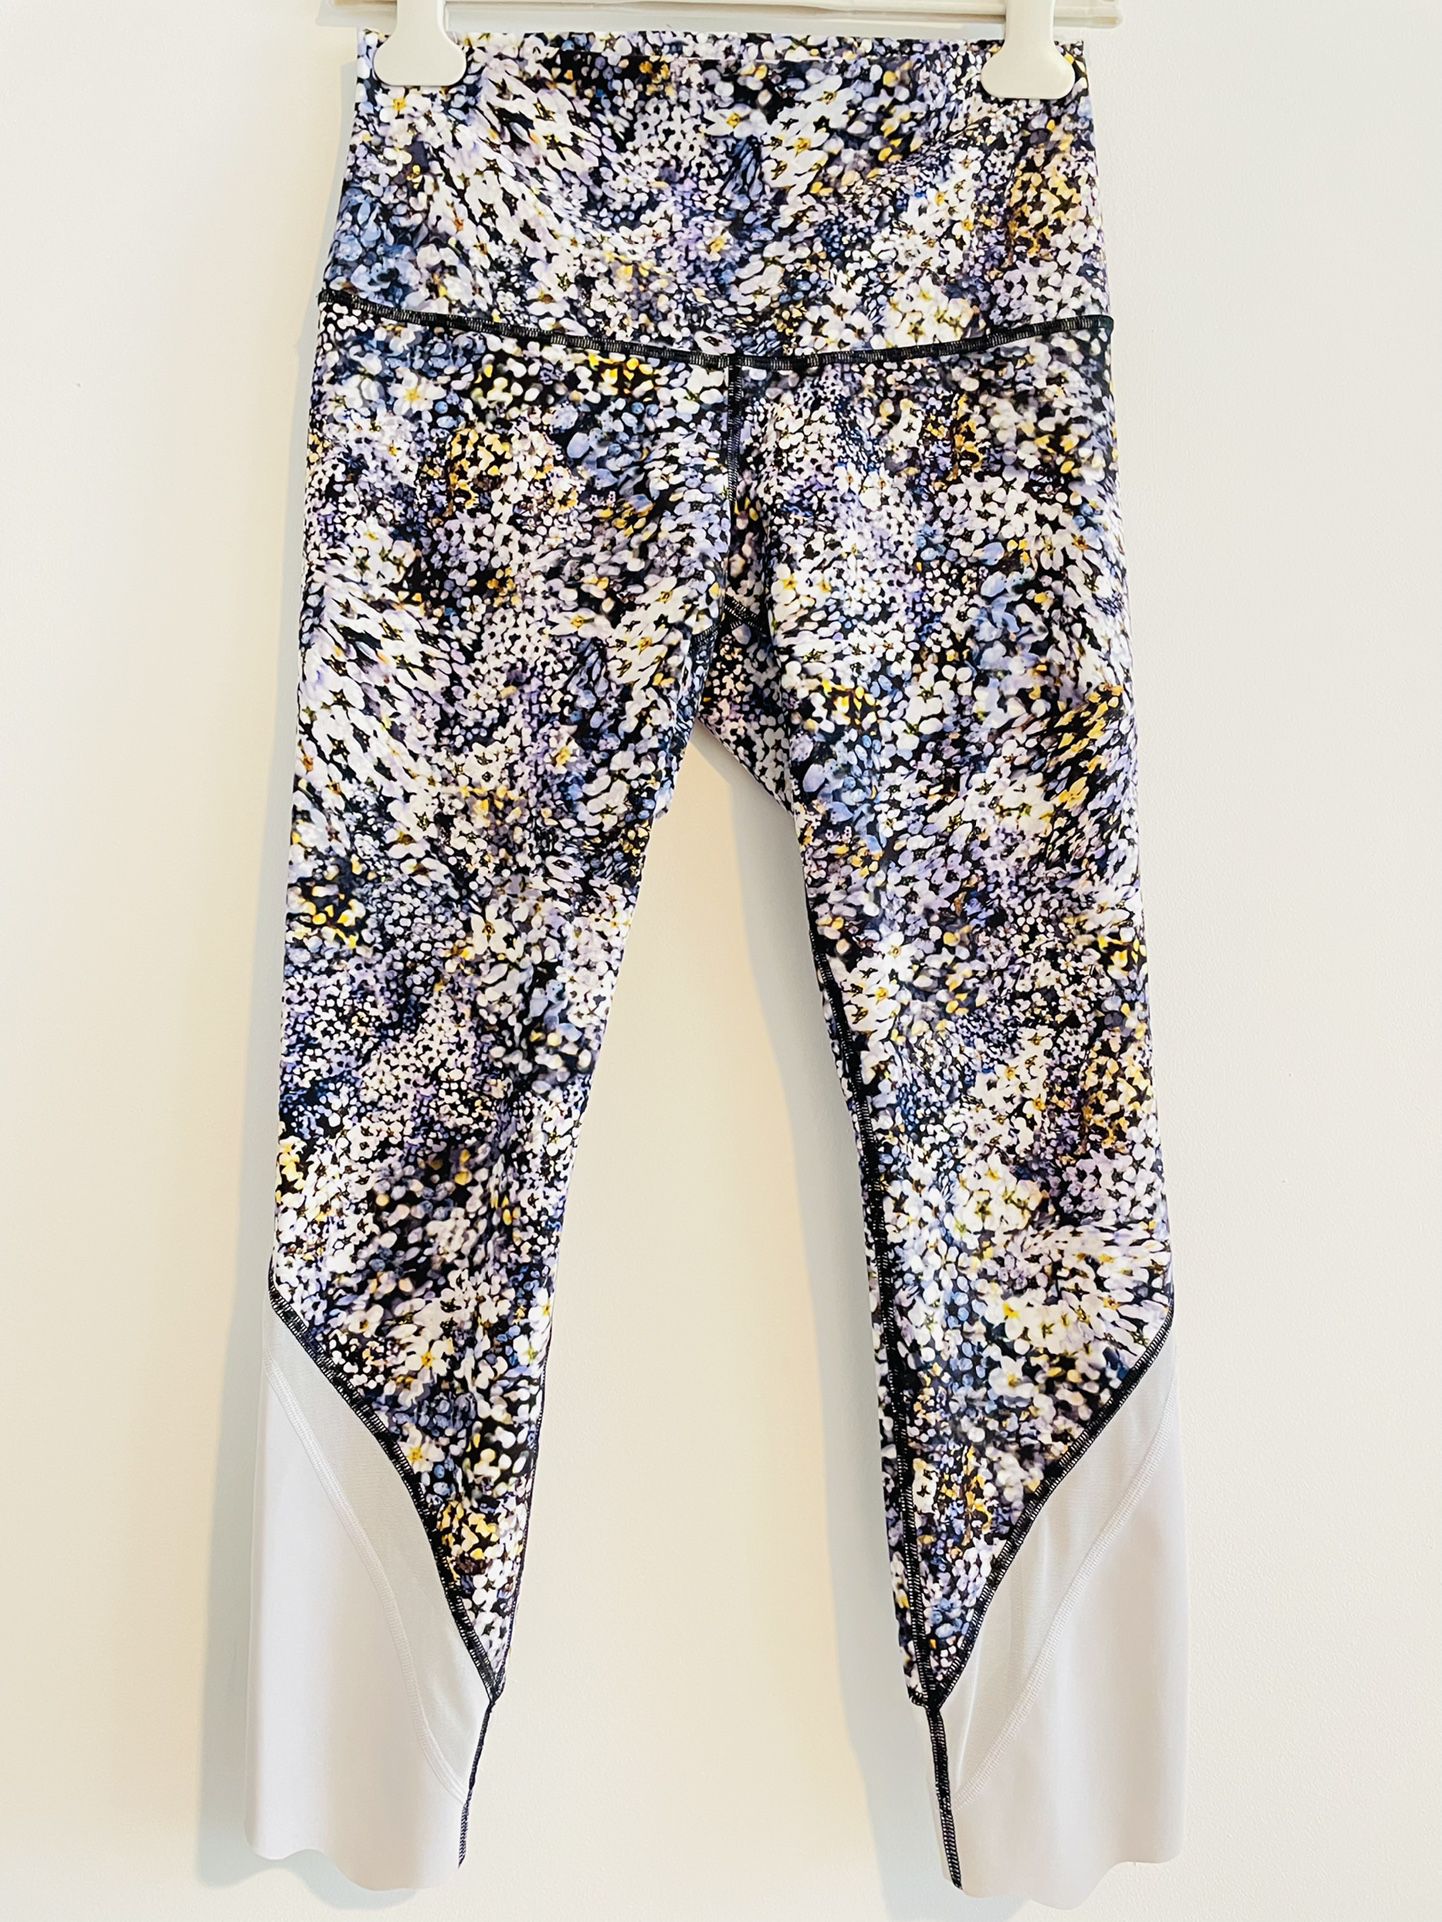 Lululemon Leggings Floral Print (brand's size) Size 8 for Sale in